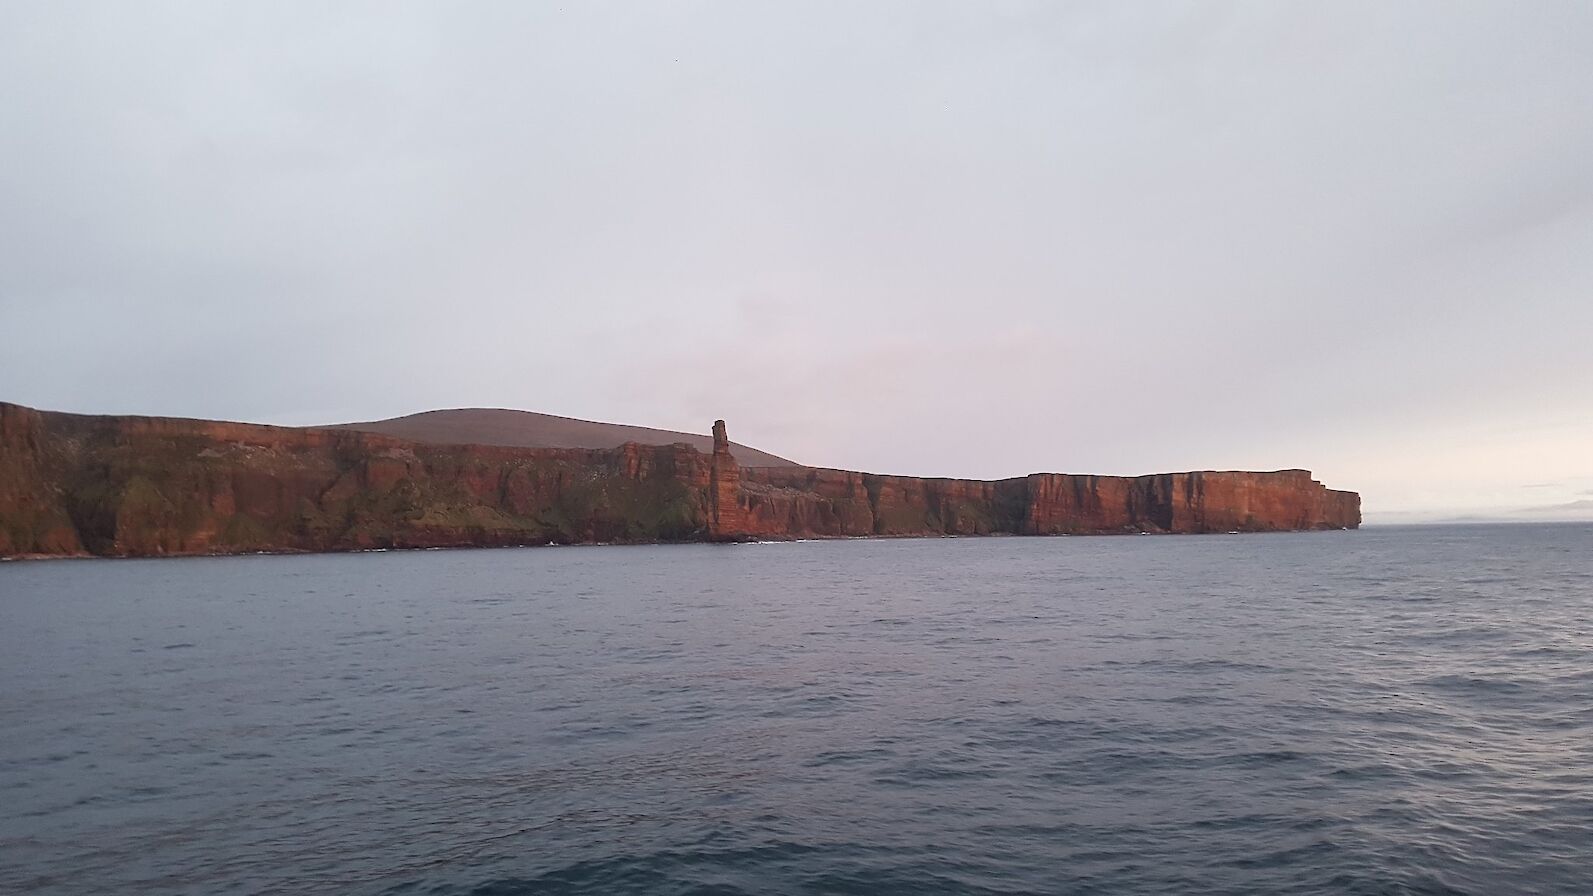 Looking south along the Hoy coastline - image by Richy Ainsworth